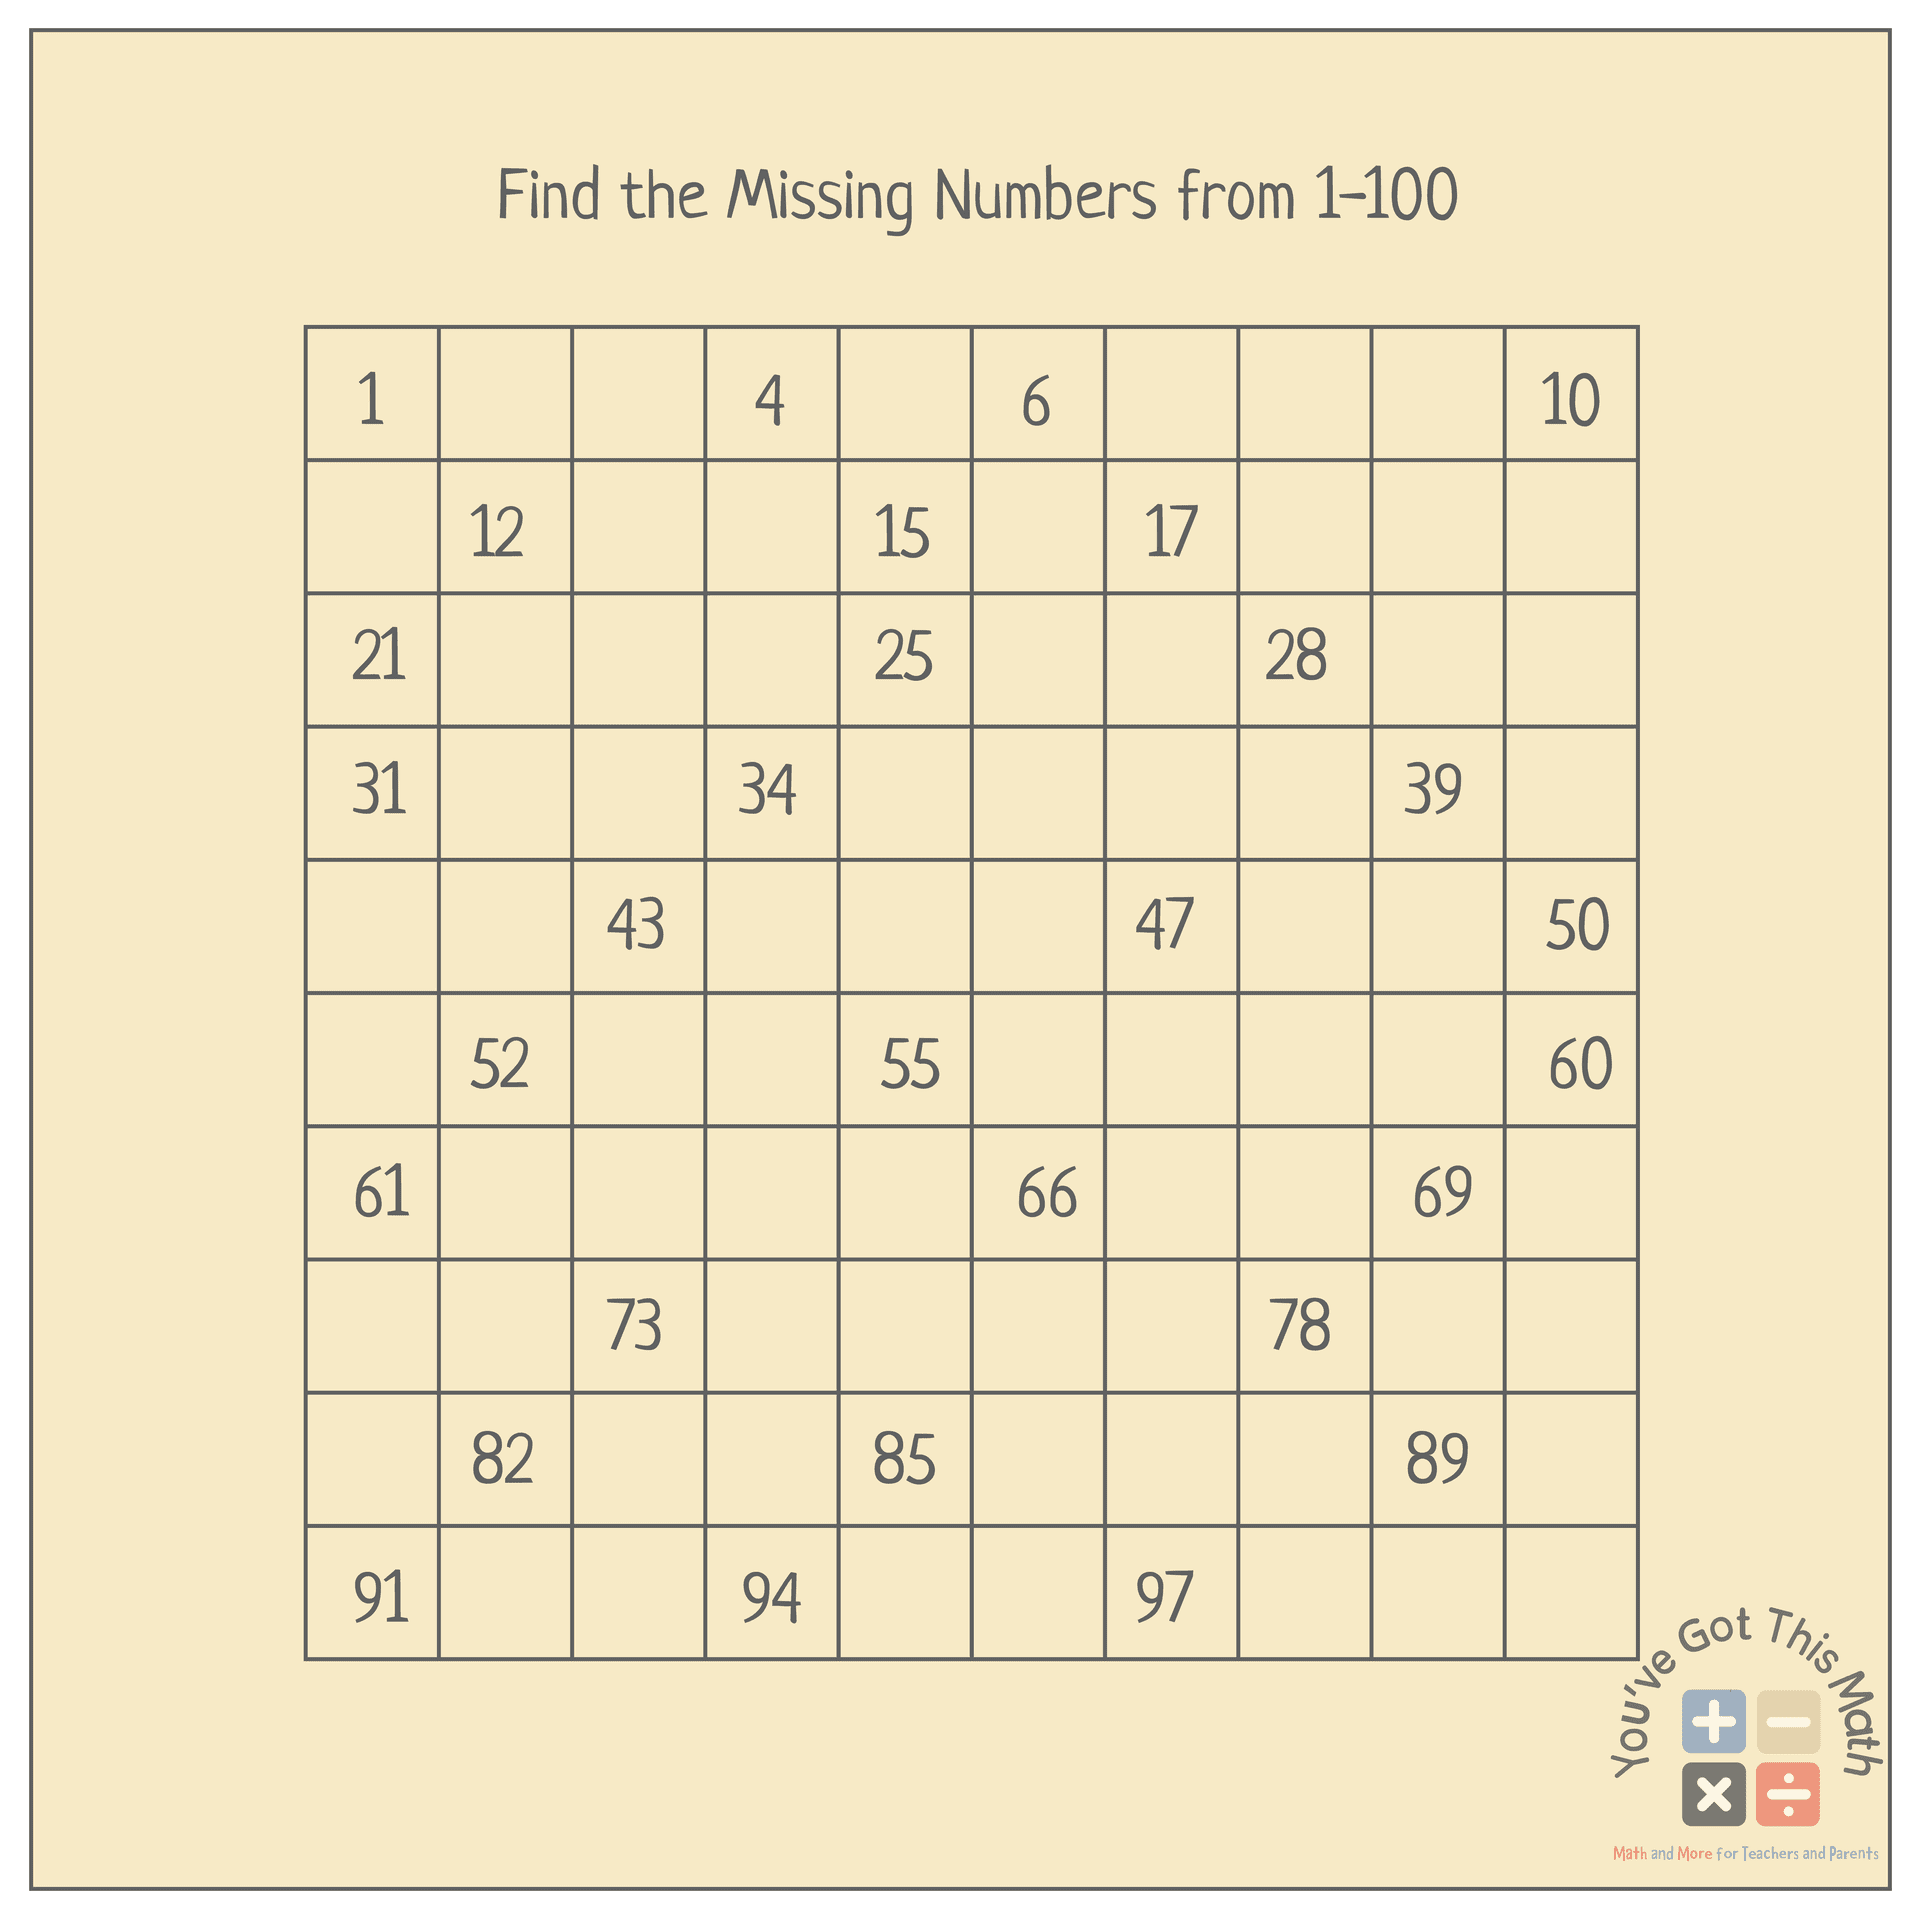 Find the Missing Numbers from 1-100